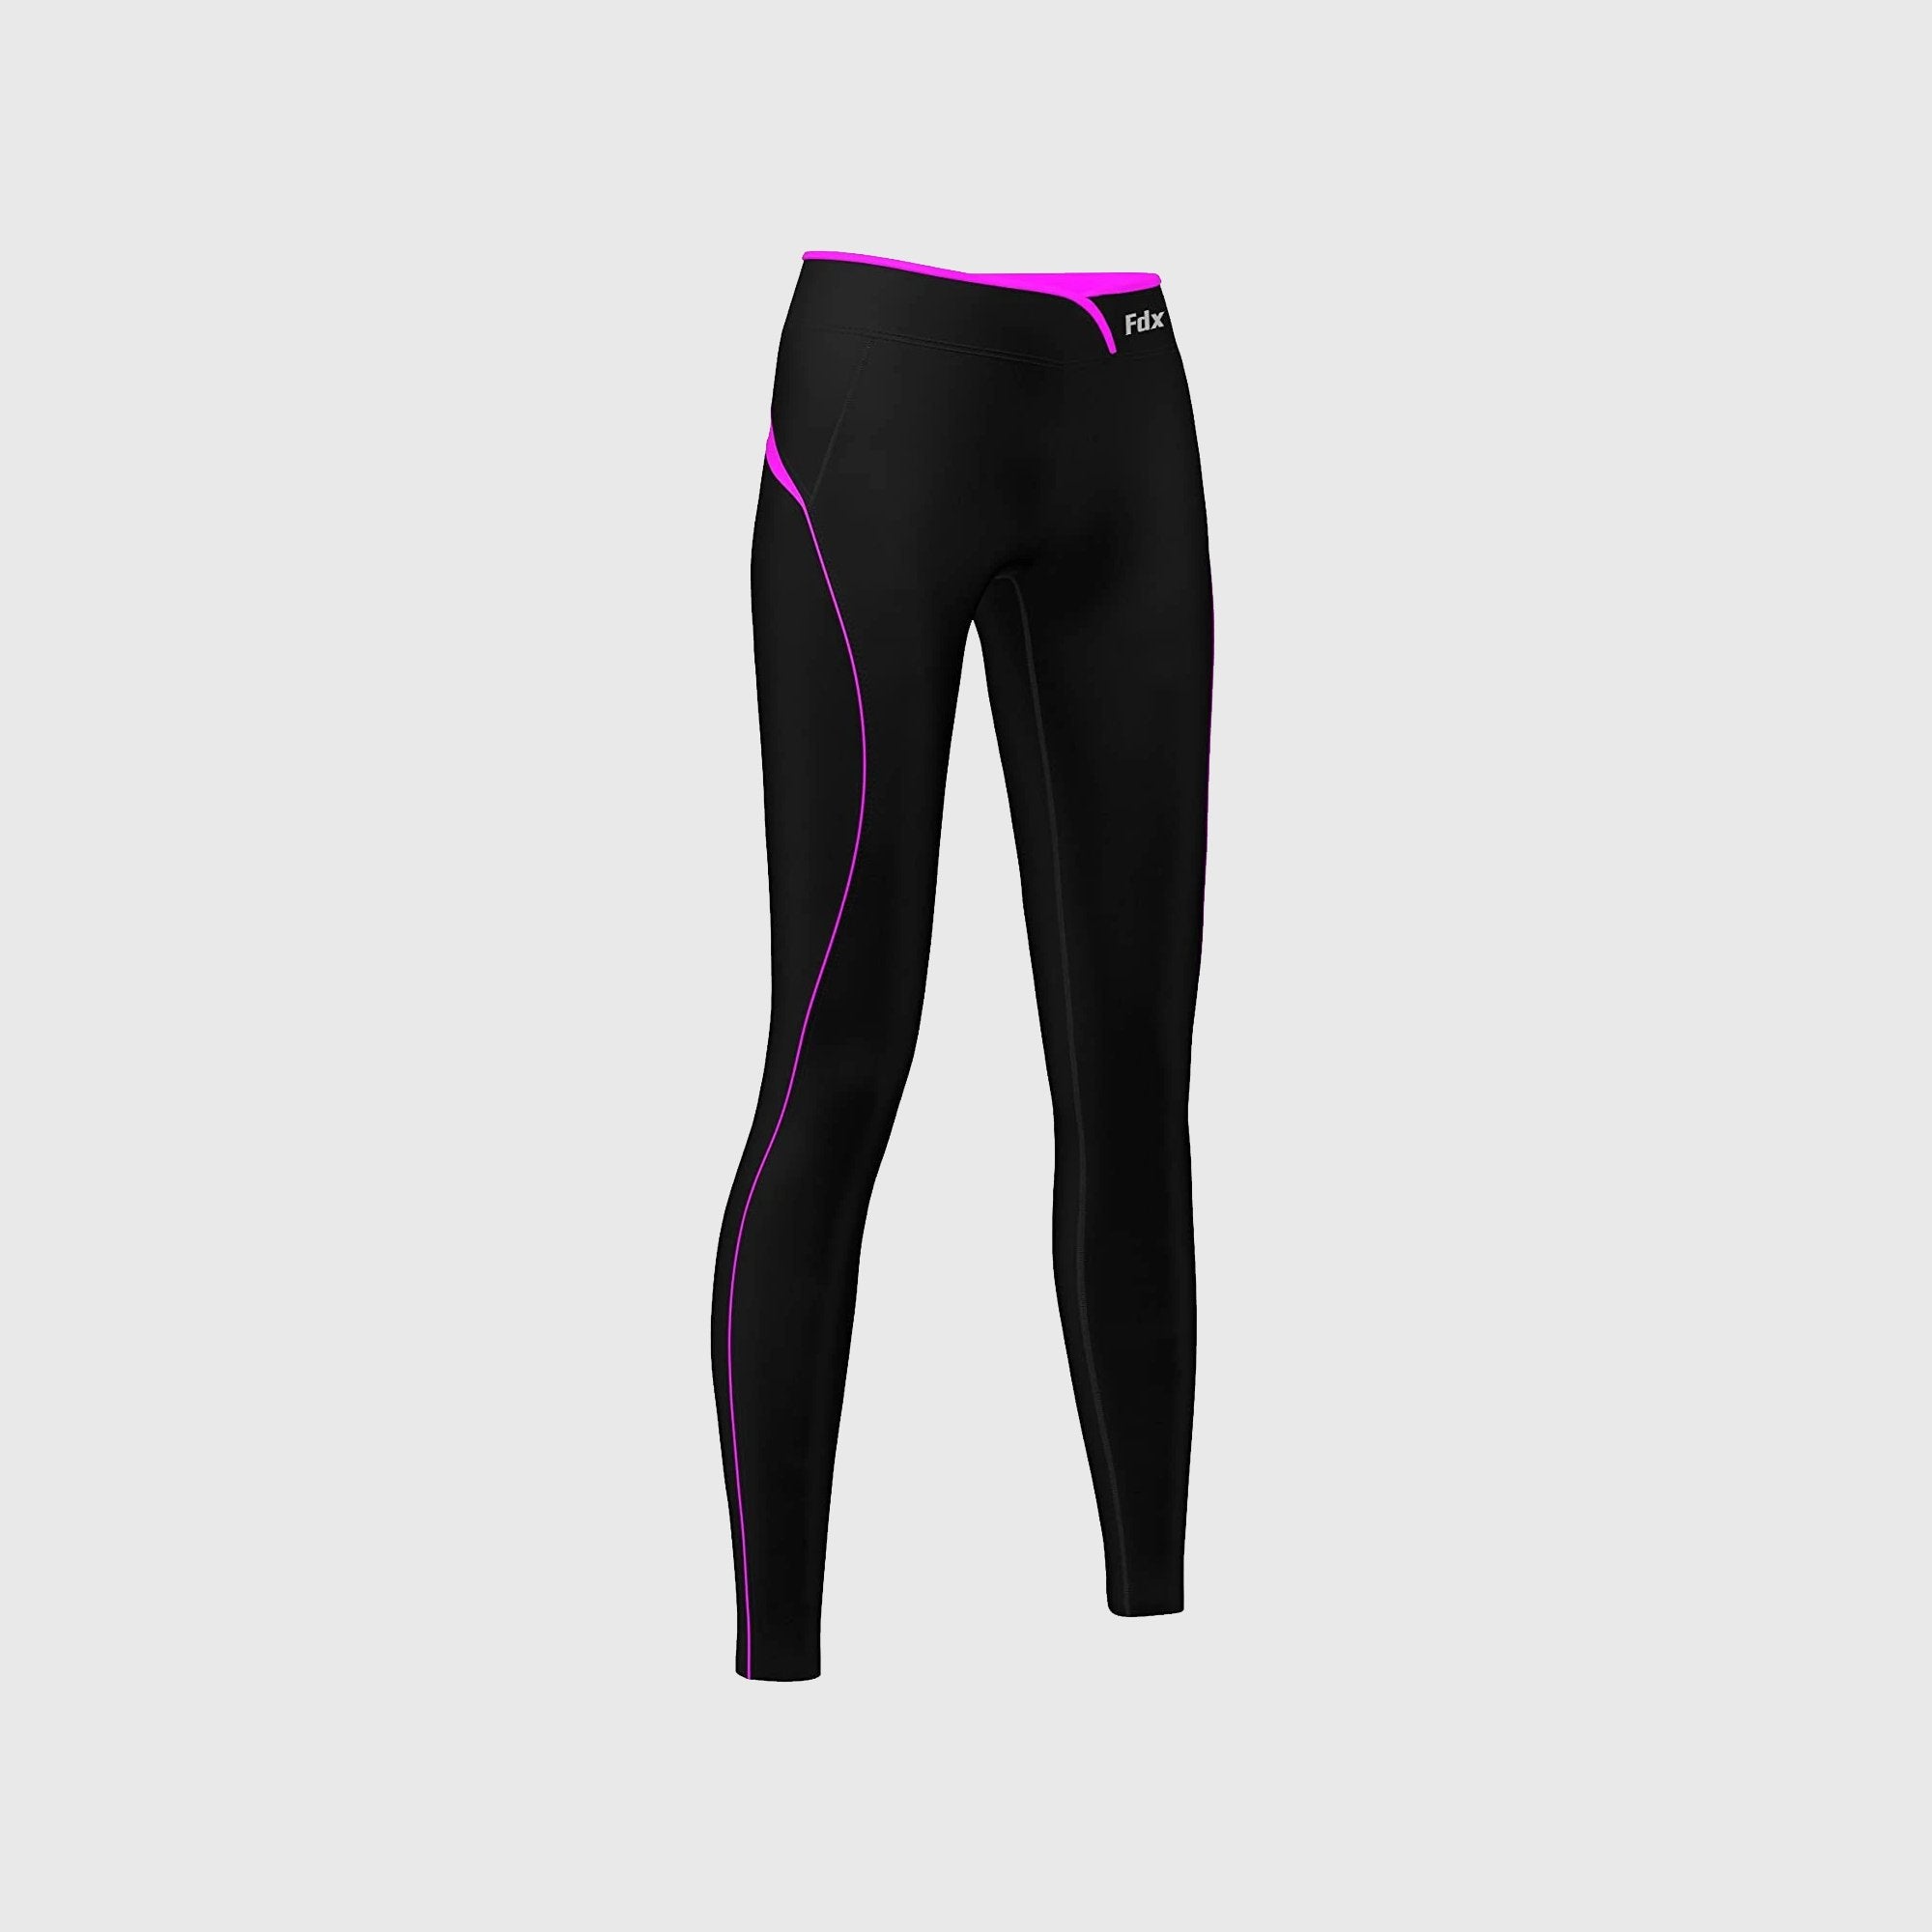 Fdx P2 Pink Women's Thermal Base Layer Winter Compression Leggings